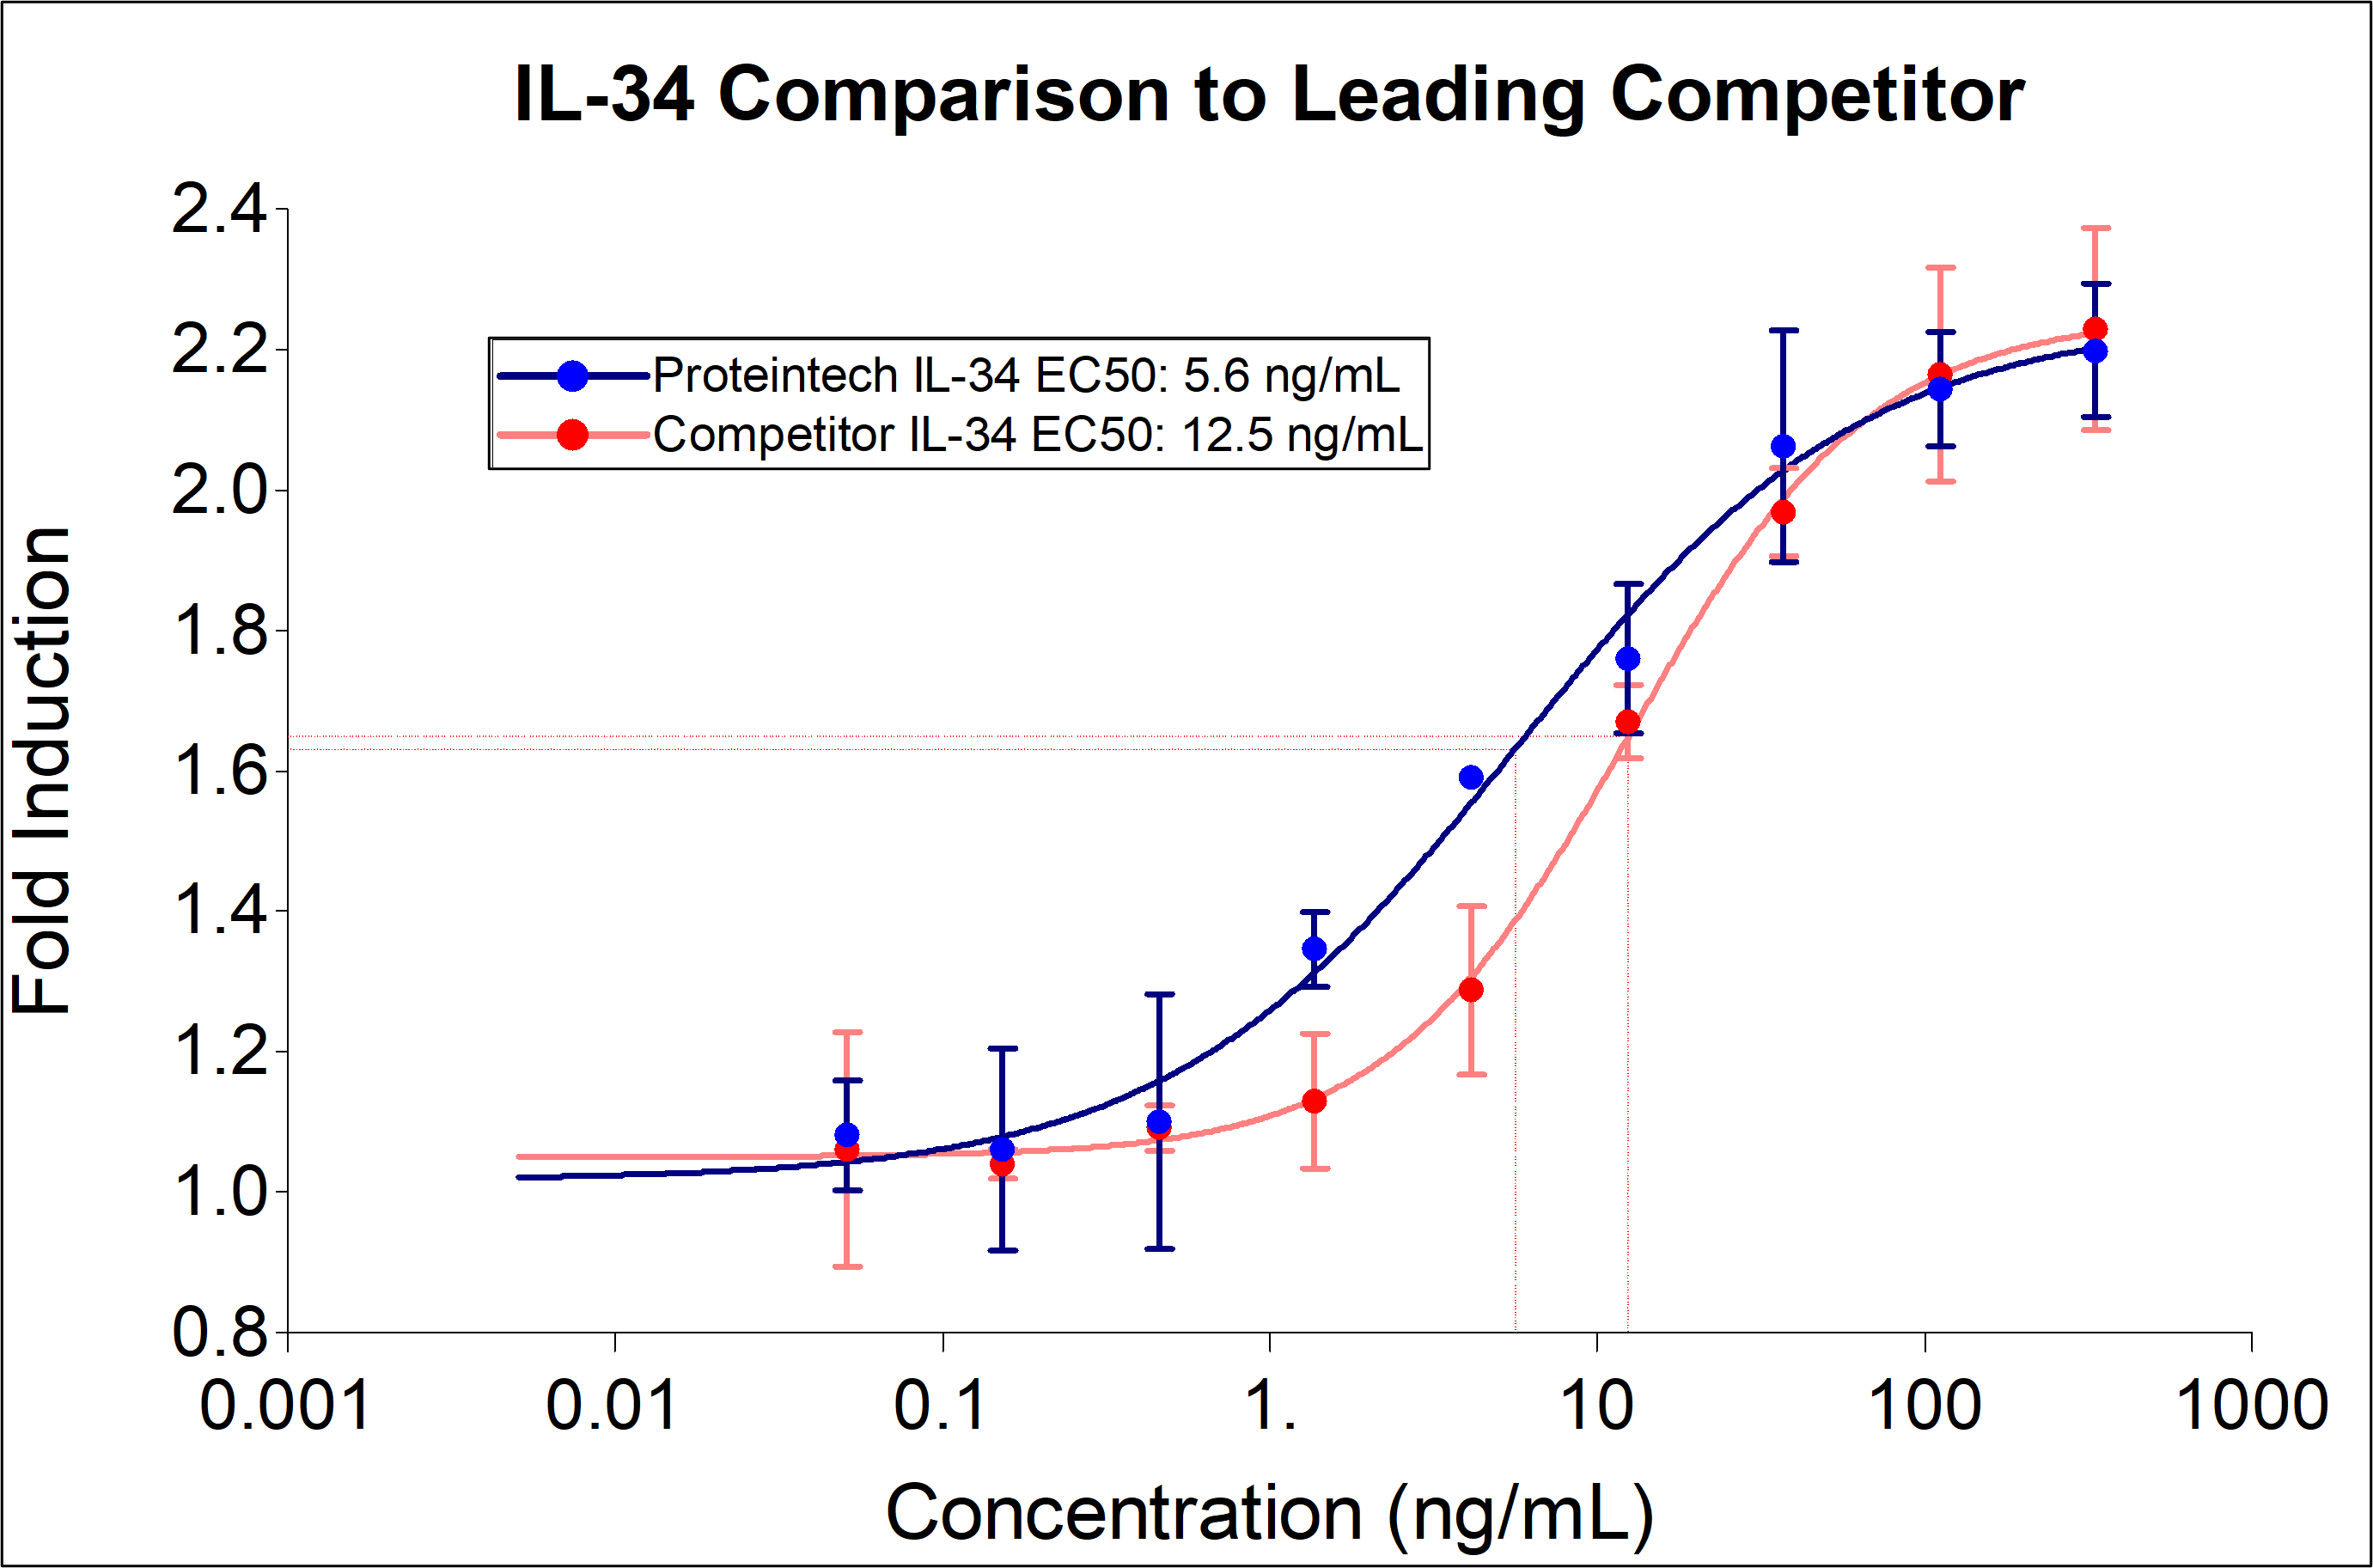 Proteintech IL-34 (HZ-1316) demonstrates a 2-fold decrease in EC50 and equivalent fold induction compared to leading competitors. Recombinant IL-34 stimulates dose-dependent proliferation of PBMCs. Cell number was quantitatively assessed by PrestoBlue® Cell Viability Reagent.  PBMCs were treated with increasing concentrations of IL-34 for 6 days. The EC50 was determined using a 4-parameter non-linear regression model. The EC50 range is 2-12 ng/mL.